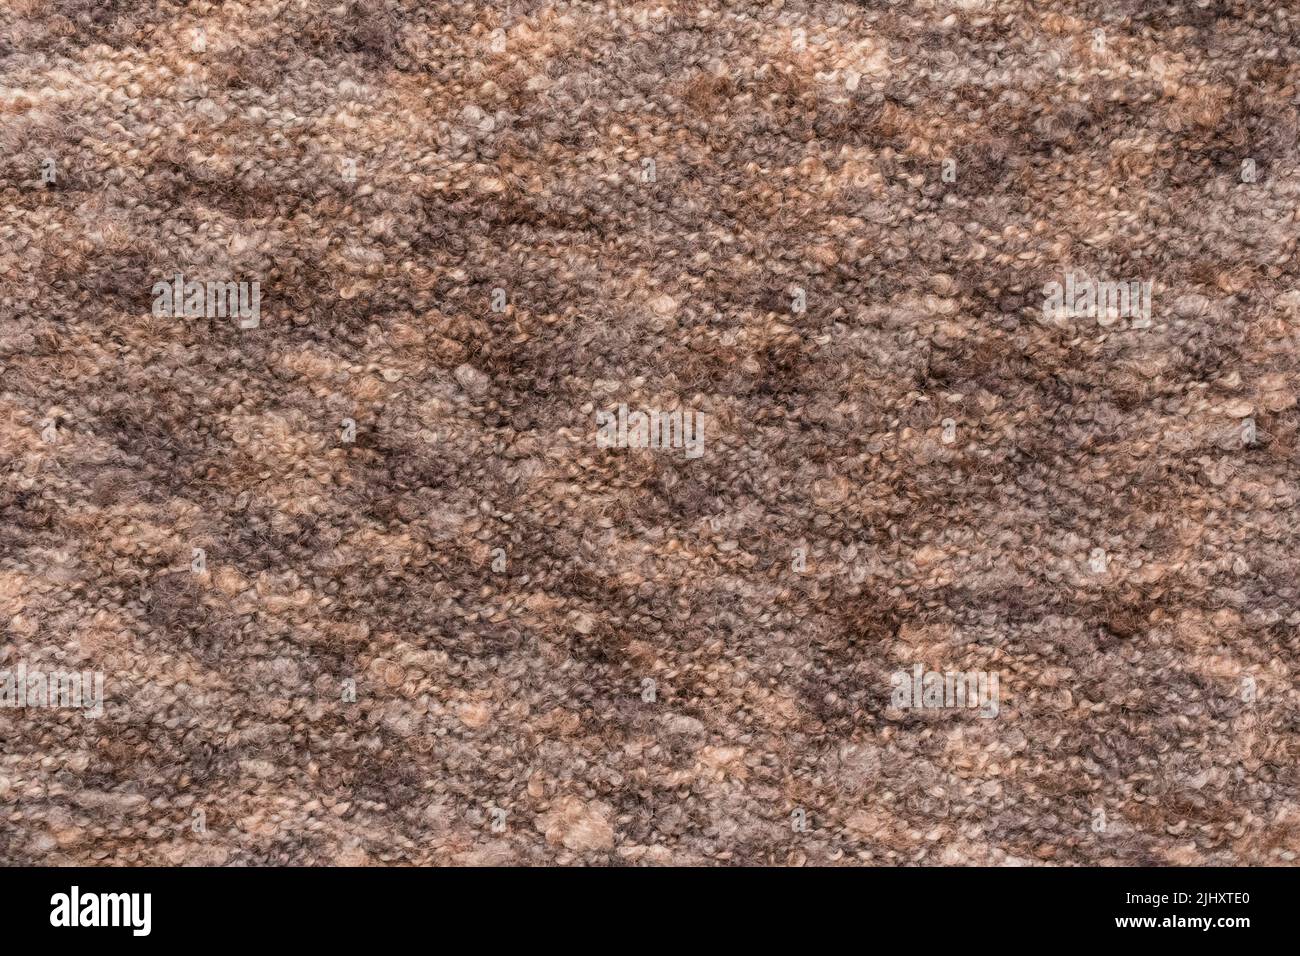 Brown fur wool abstract pattern nature skin soft warm fluffy background texture. Stock Photo